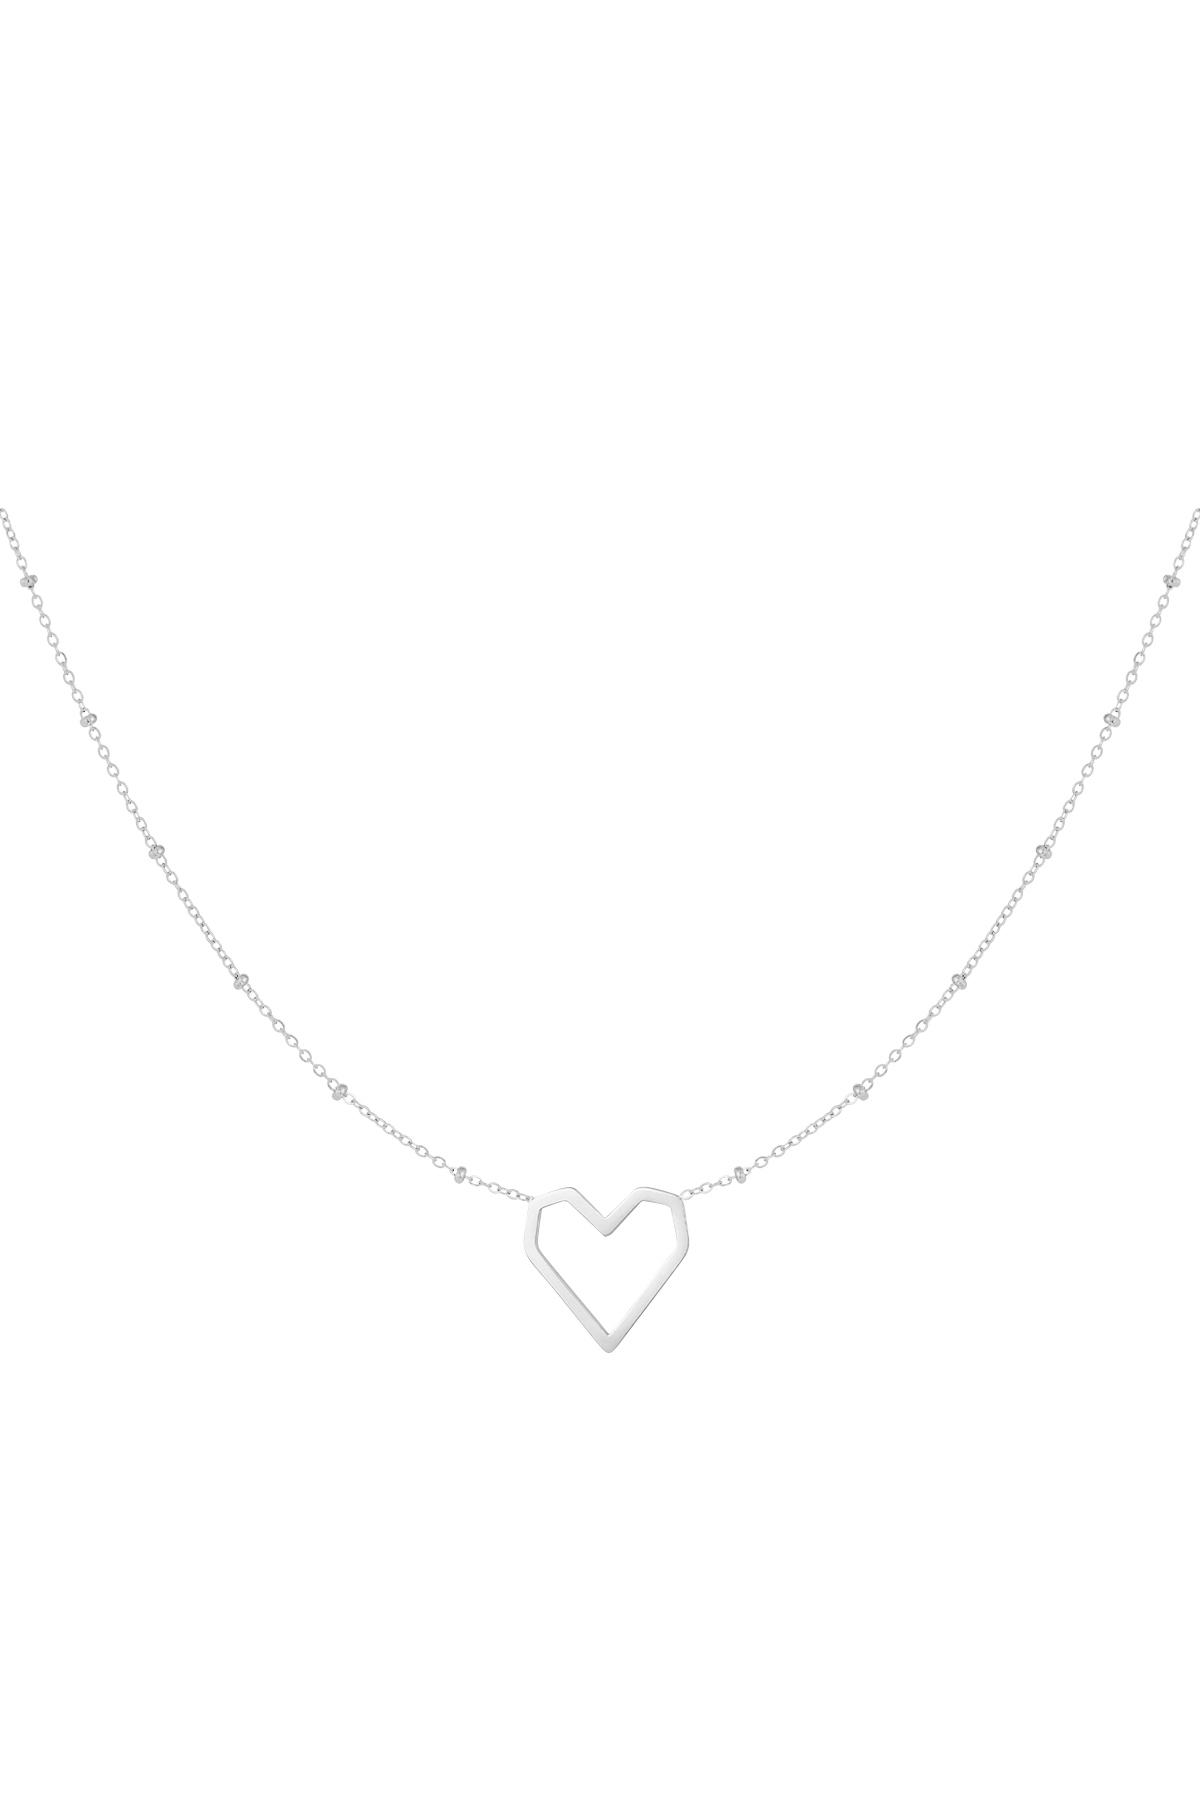 Necklace heart with dots - silver